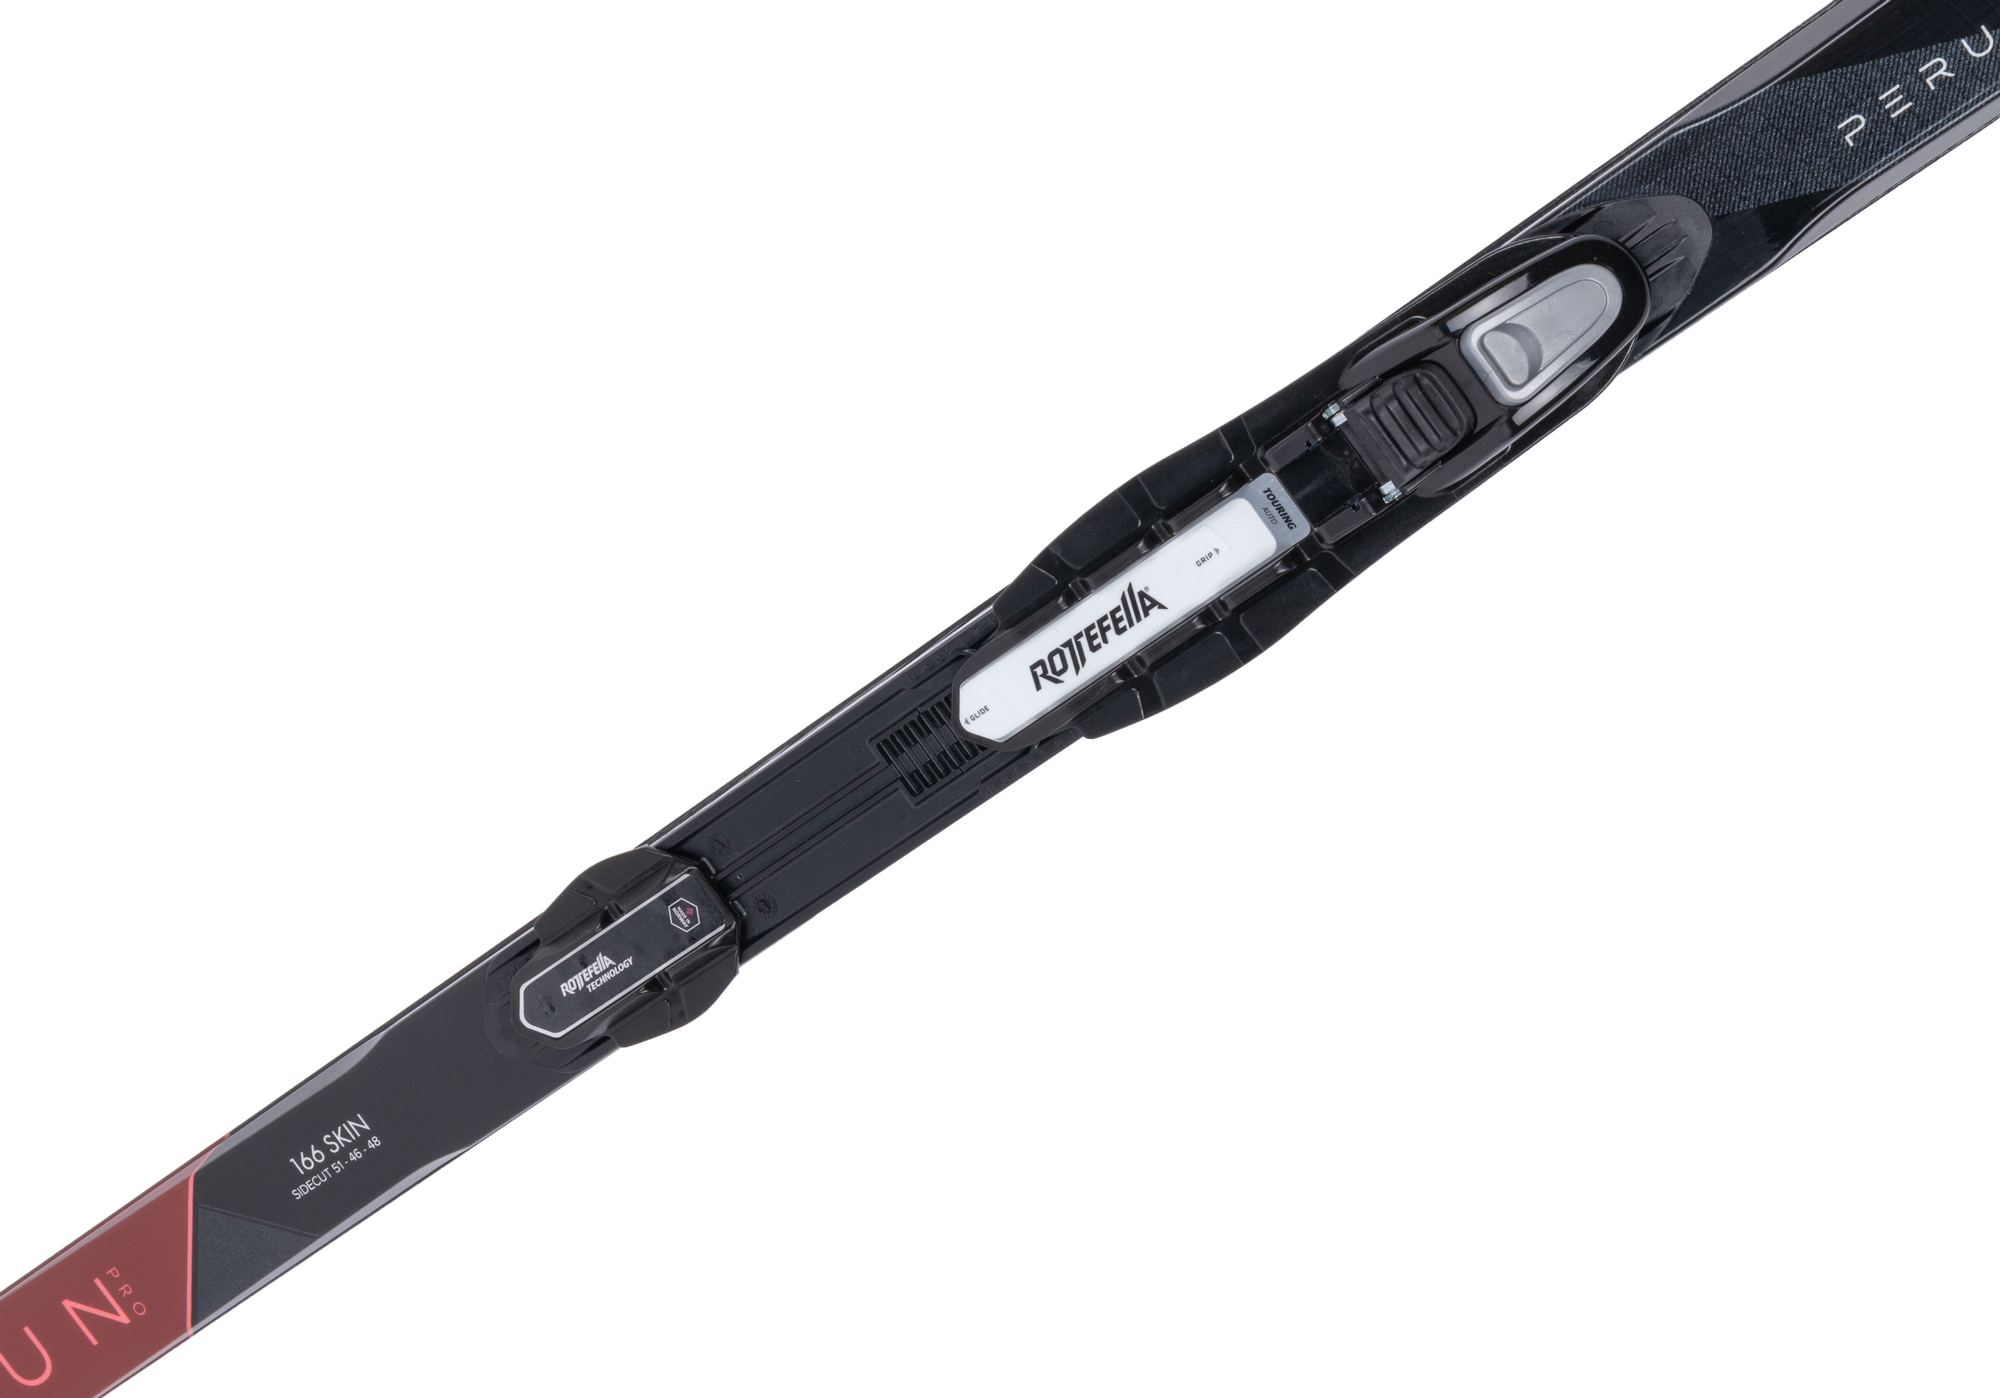 Classic style Nordic skis with climbing support